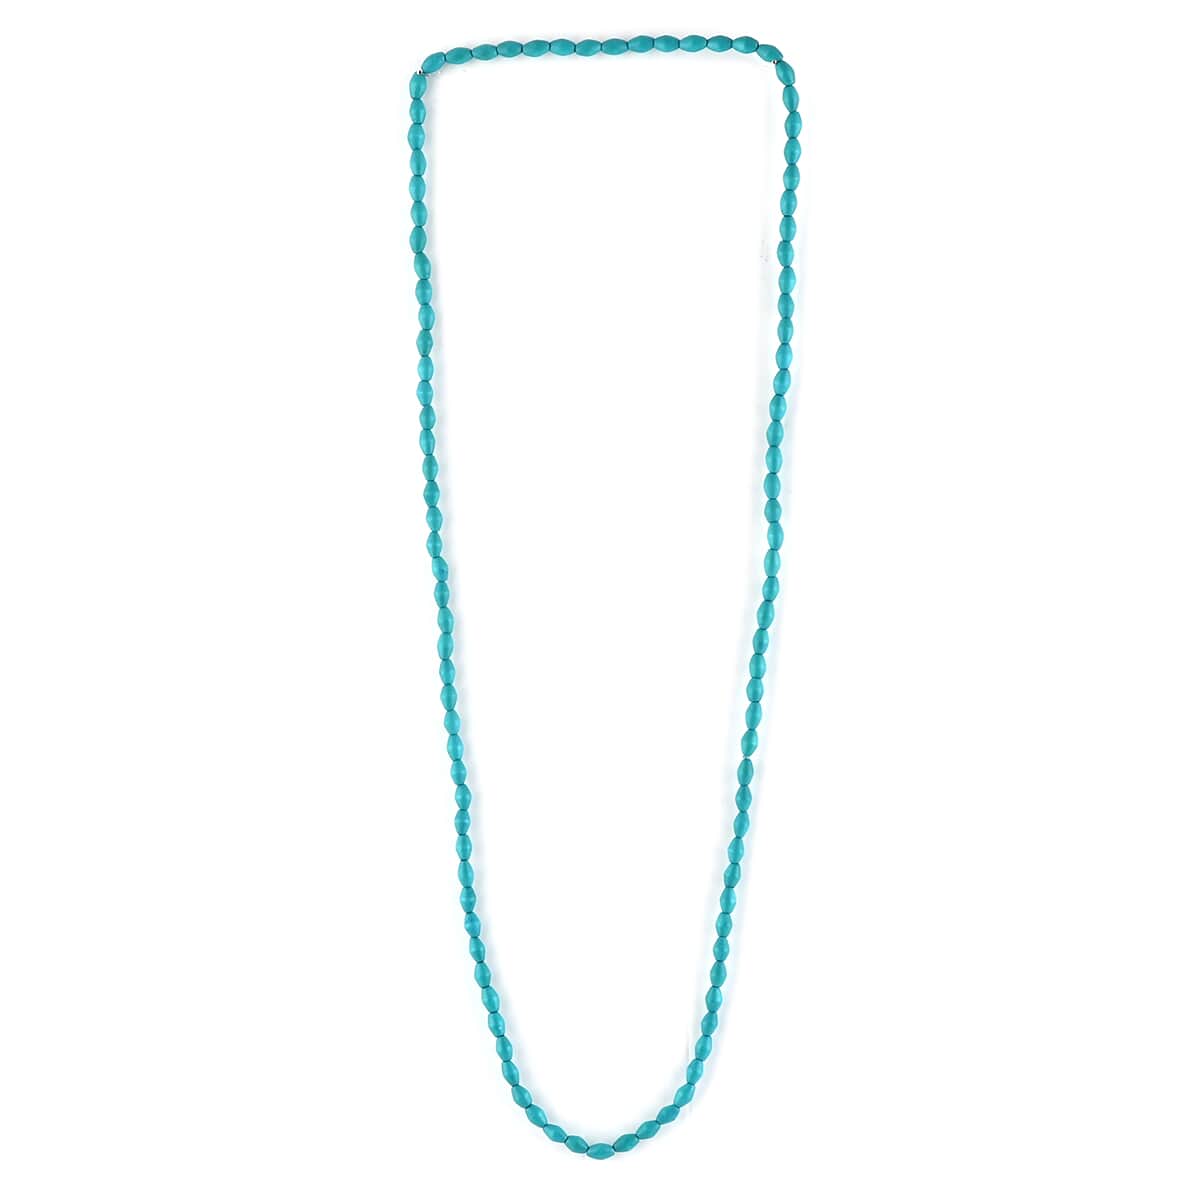 Turquoise Color Wooden Beaded Rope Necklace 38 Inches image number 2